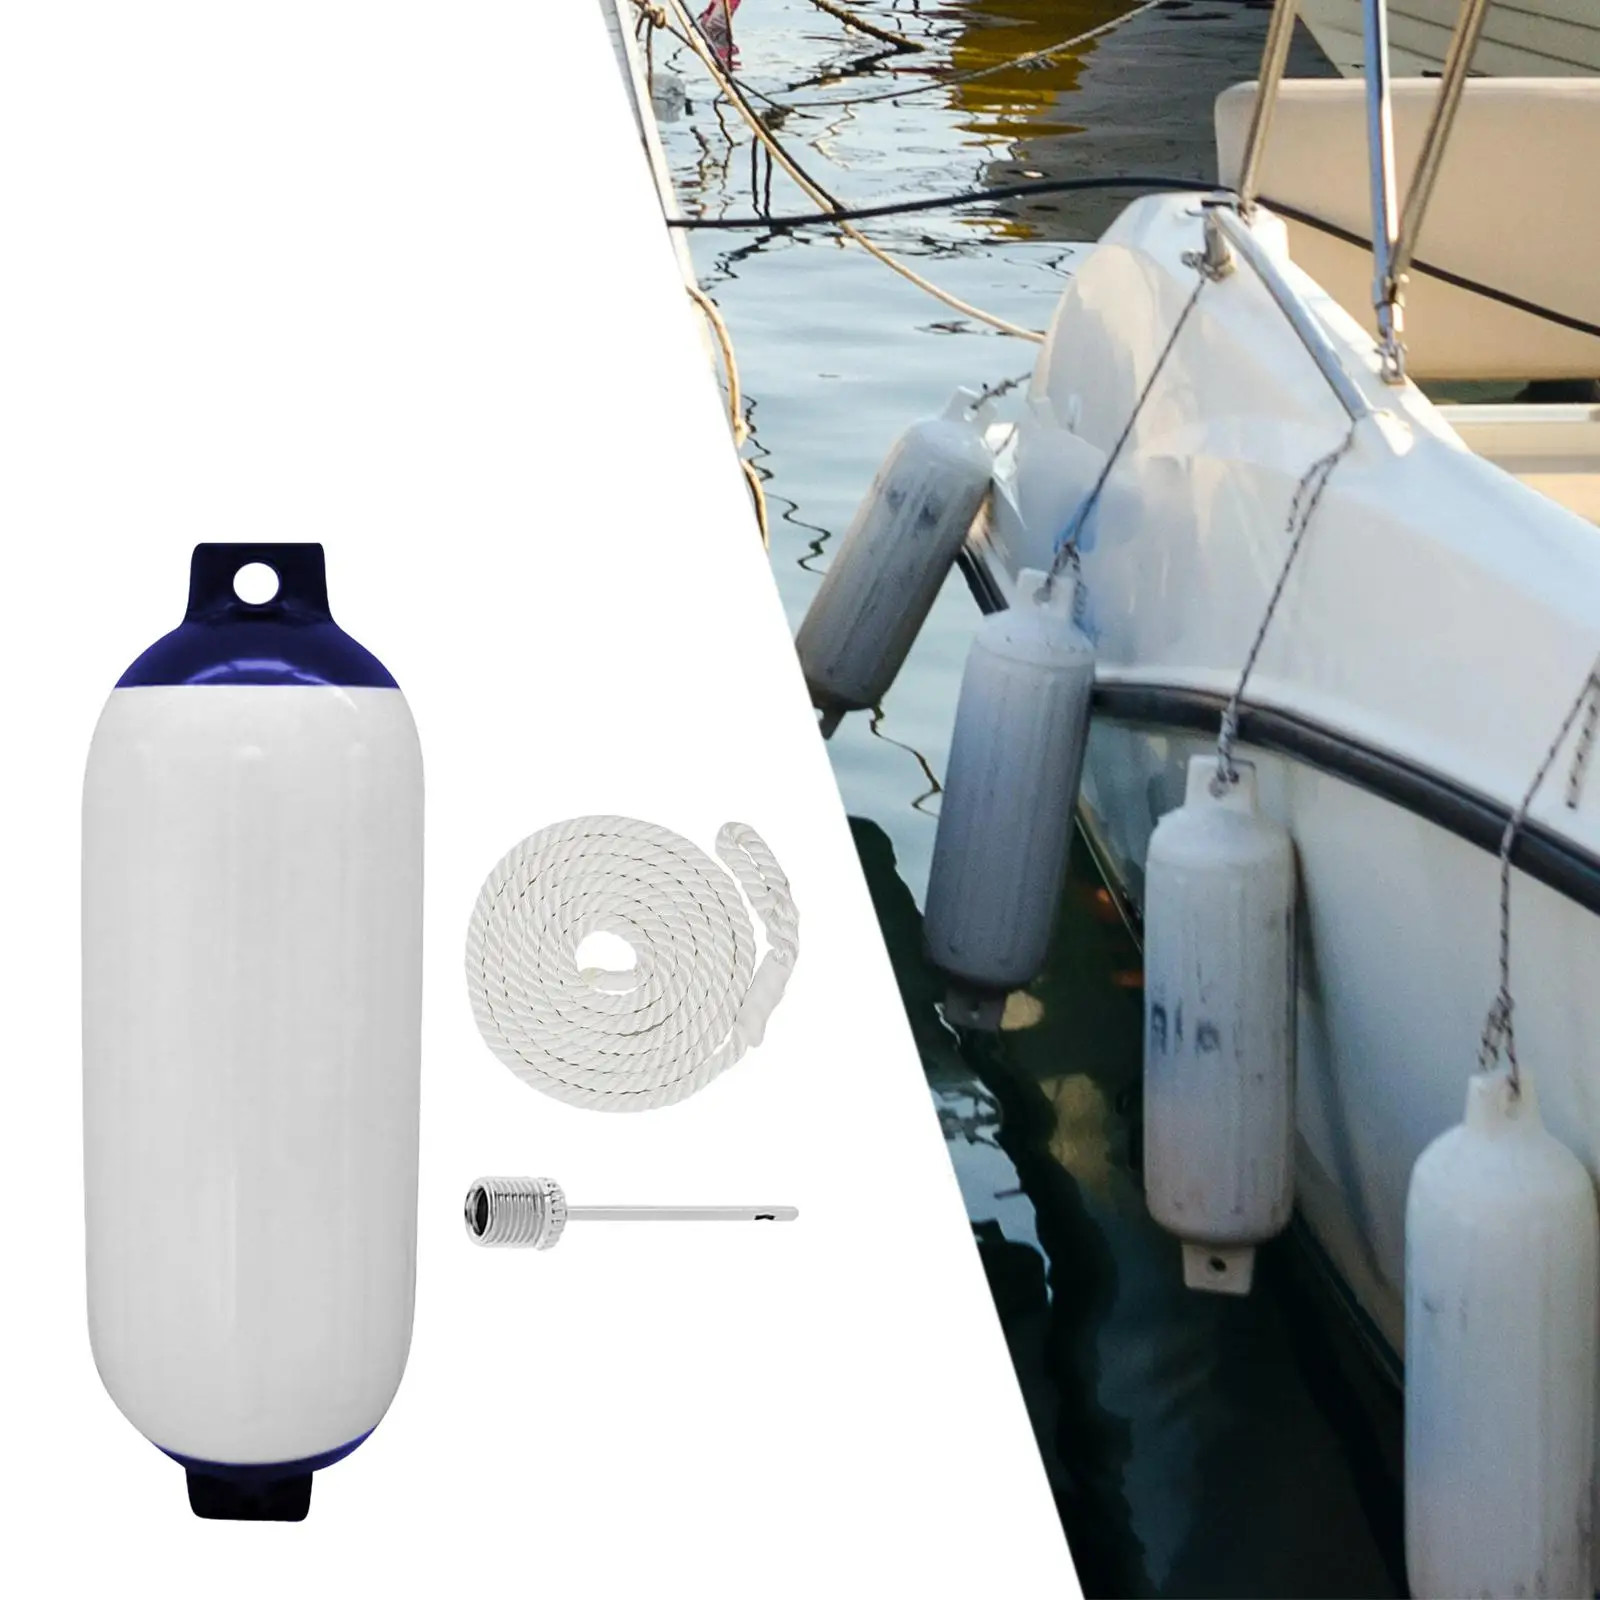 Boat Fender 4x16inch Anti Collision for Docking Yacht Fishing Boats